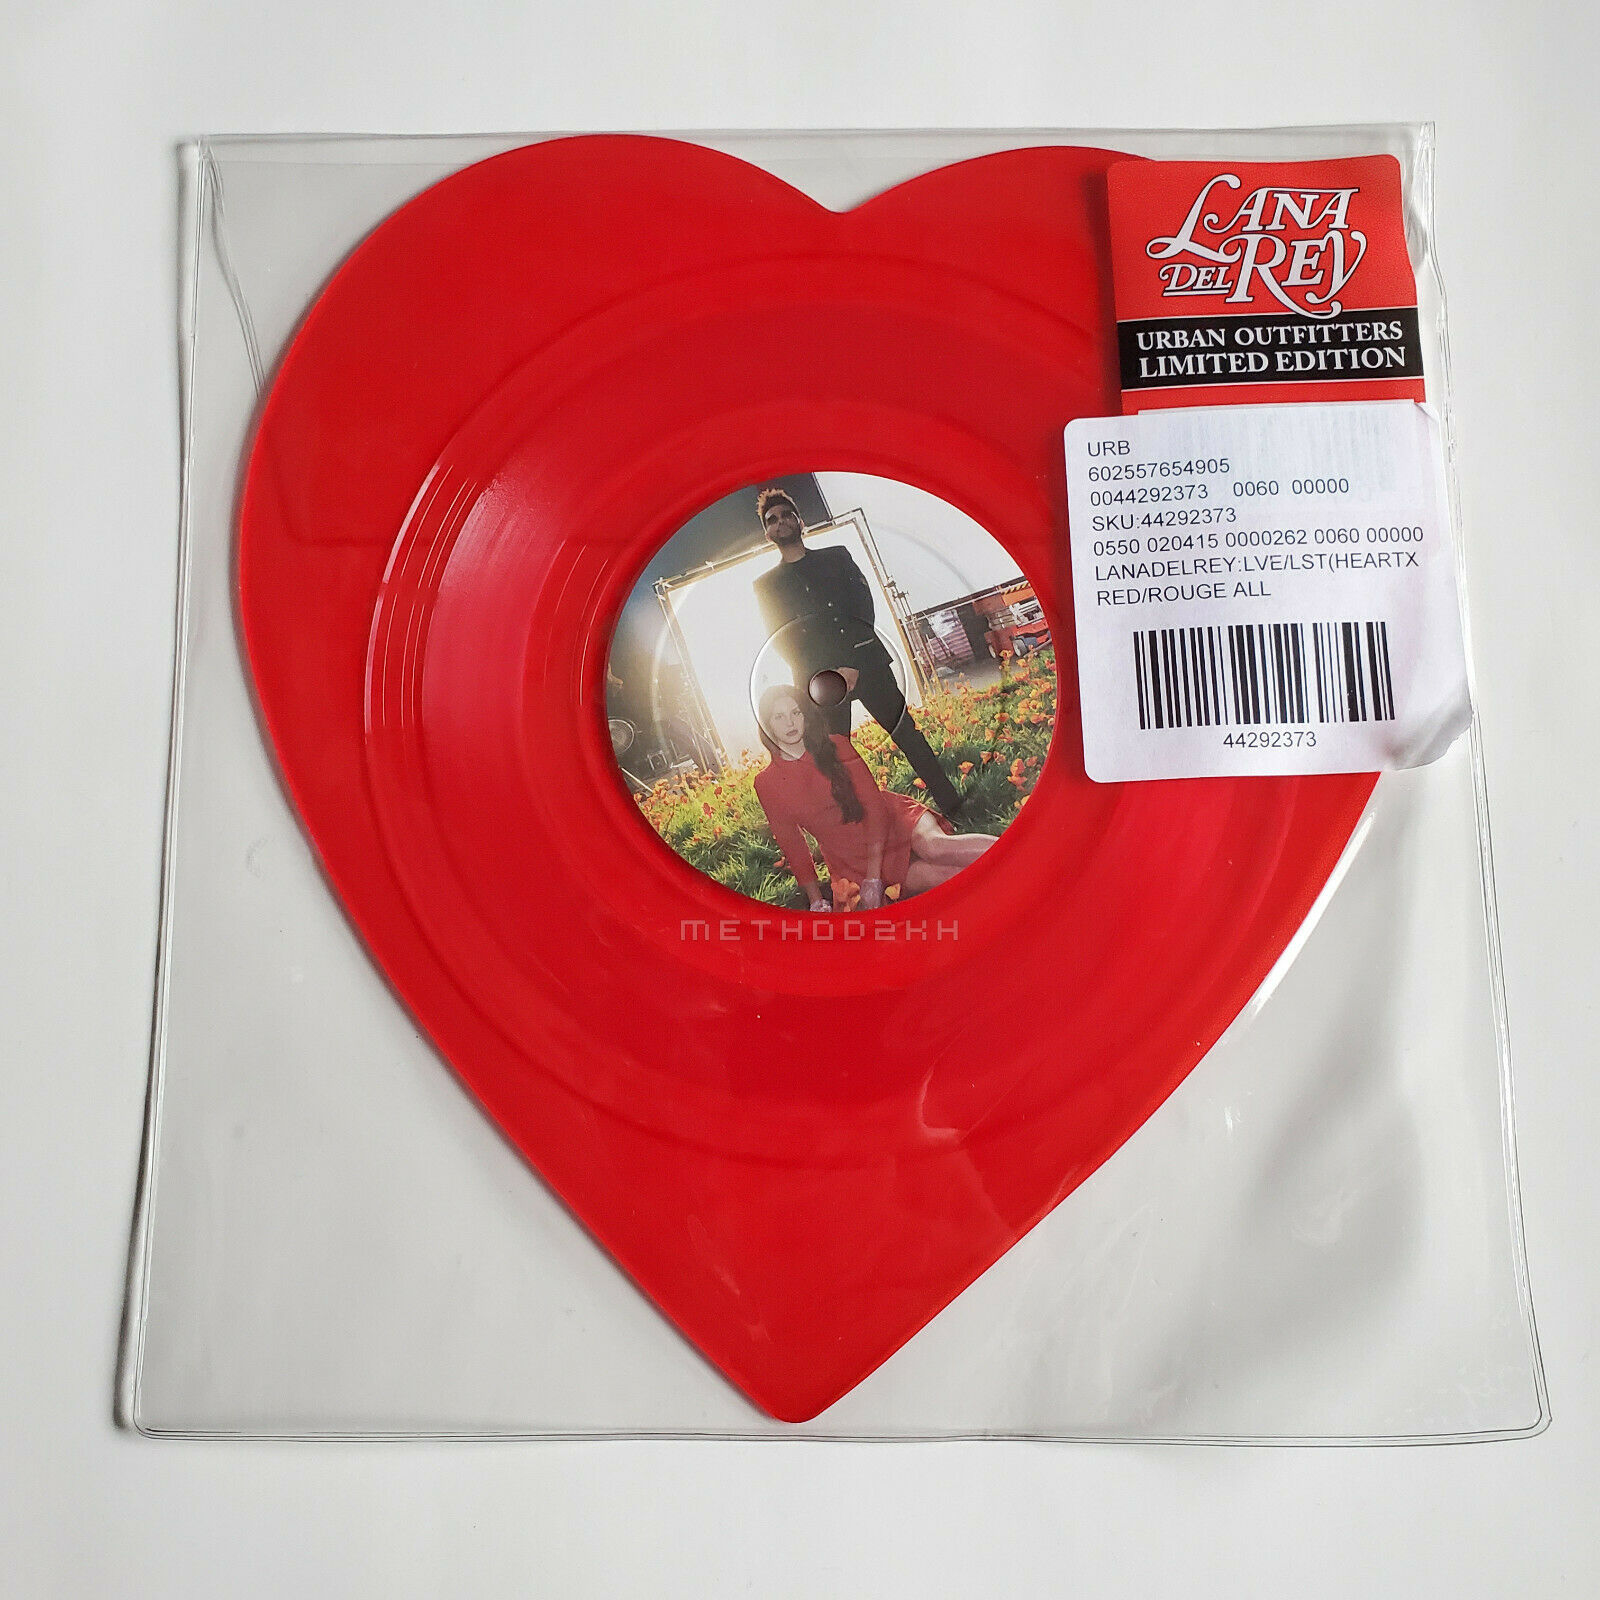 popsike.com Lana Del Rey Heart Urban Limited Edition Red Vinyl 10" NEW - auction details